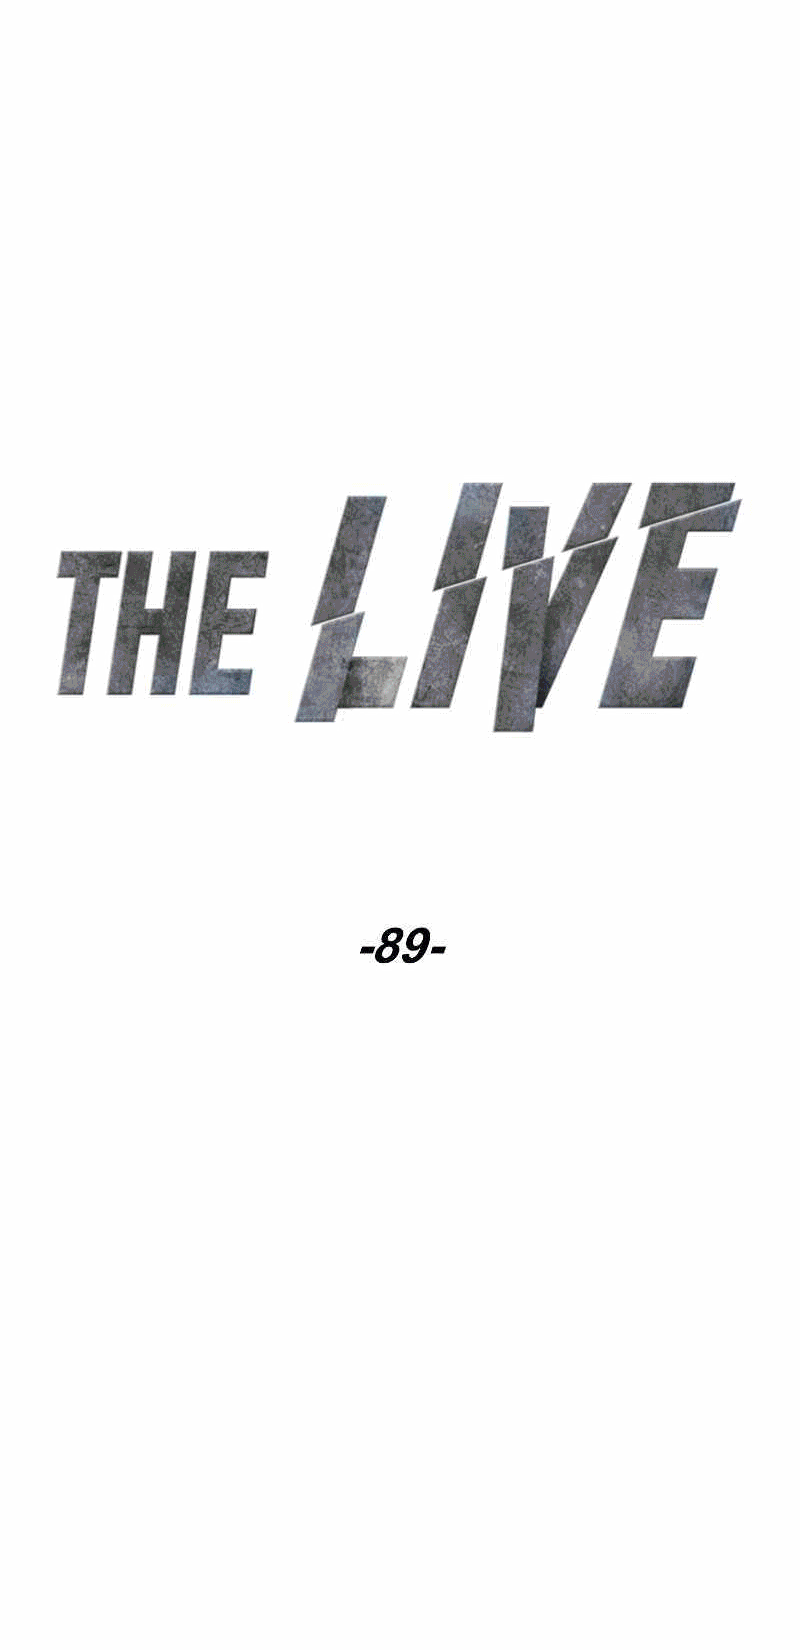 The Live 89 27